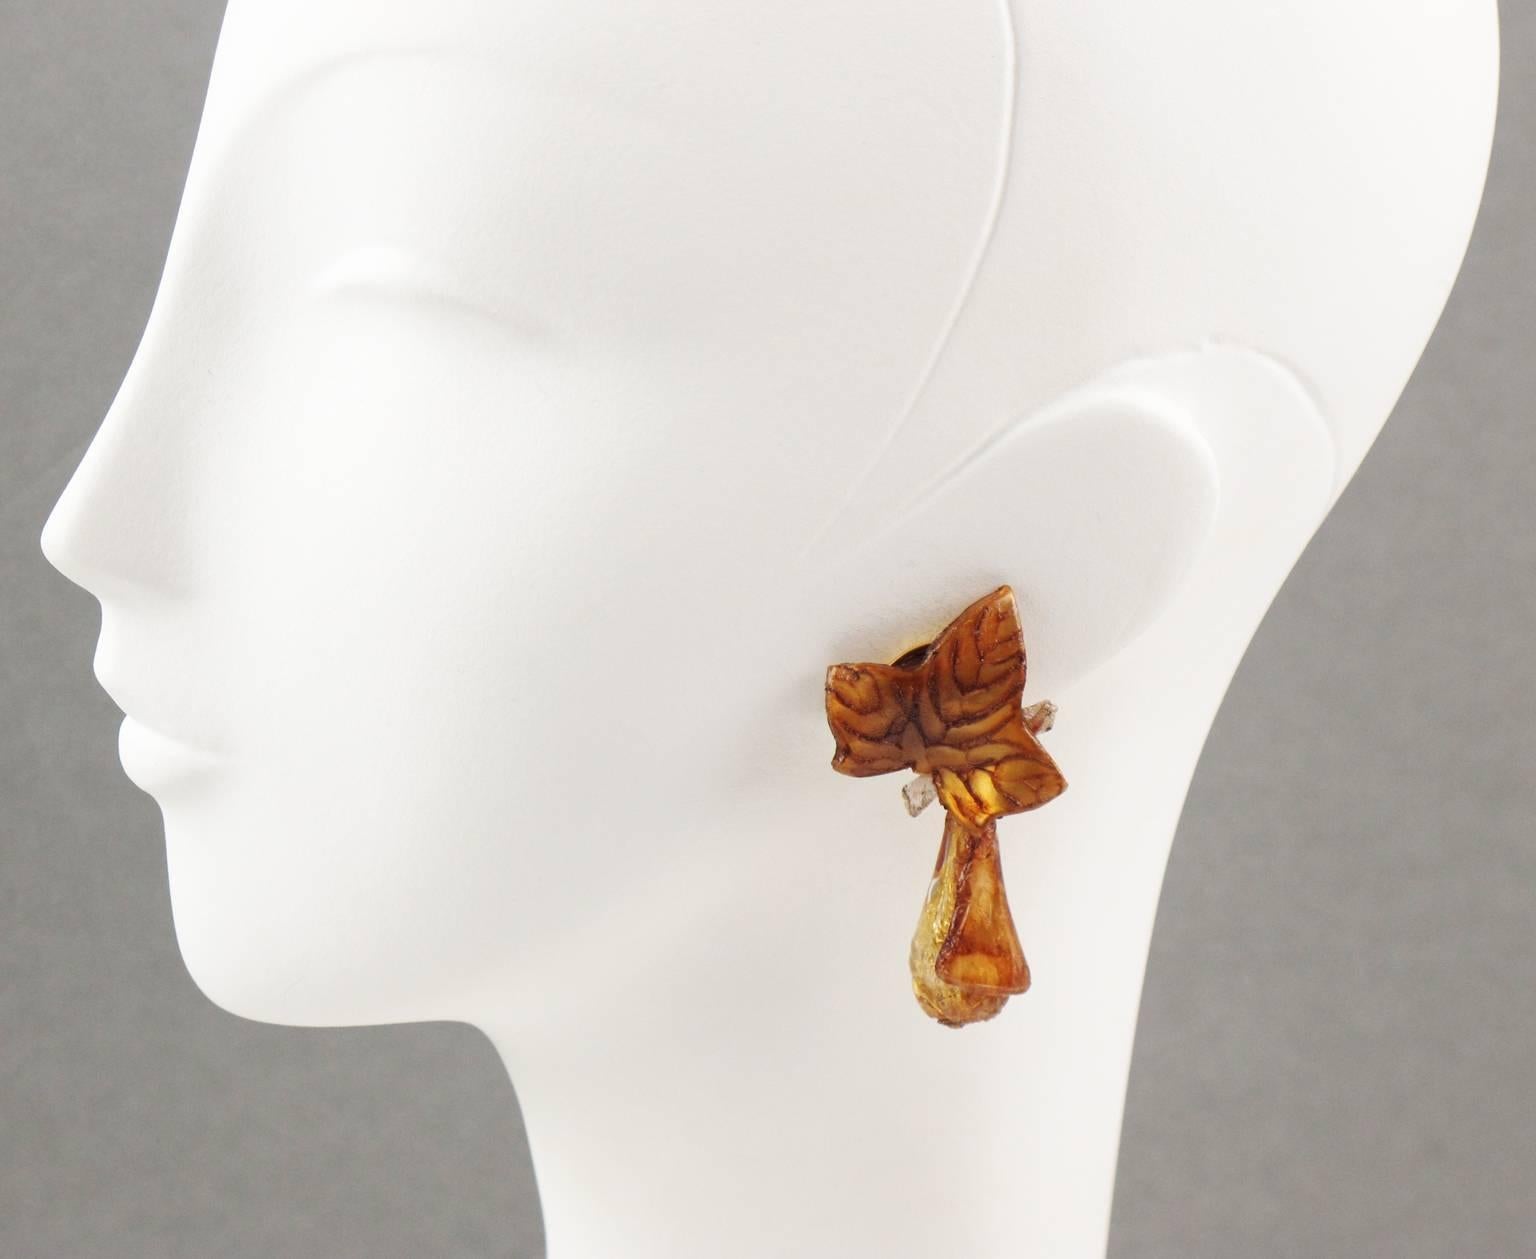 French Jewelry Designer FRANCOISE MONTAGUE Paris clip on Earrings. Vintage elegant large dangle shape, in resin or Talosel, featuring dimensional carved leaf with large drop bead. Great assorted fall bronze tones of caramel, sepia, gold foil and